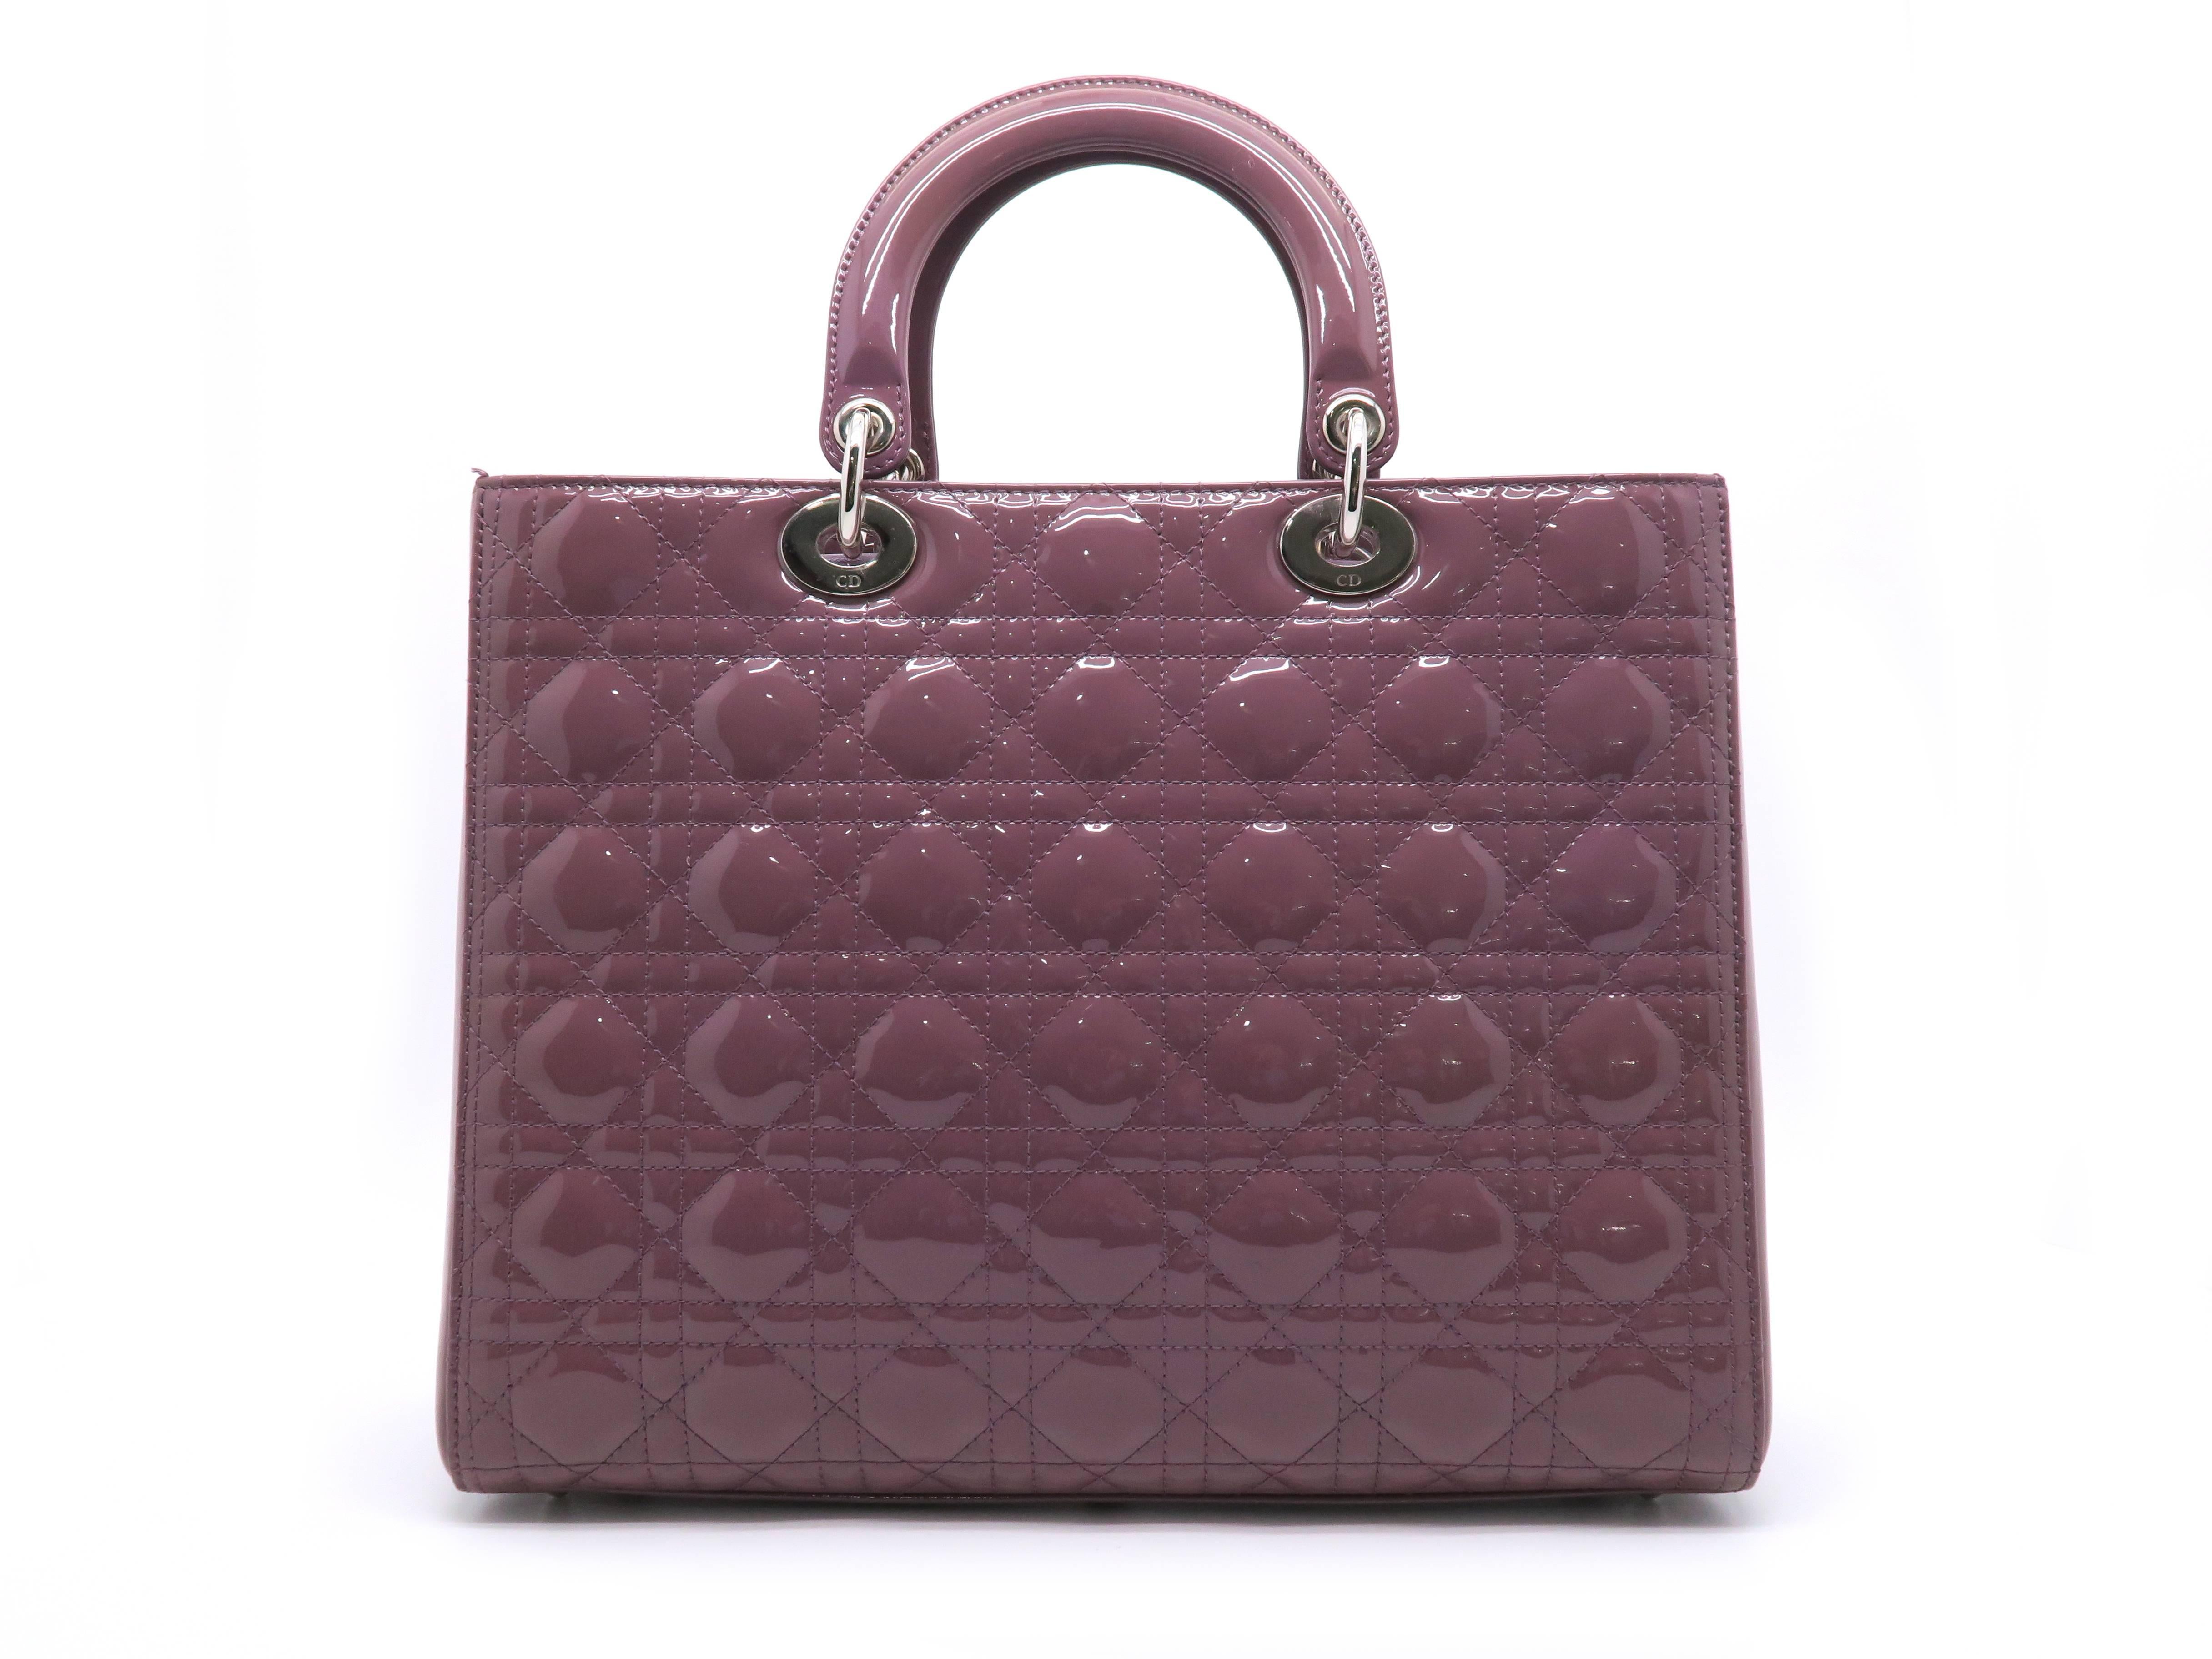 Gray Christian Dior Lady Dior Pale Purple Quilted Patent Leather Satchel